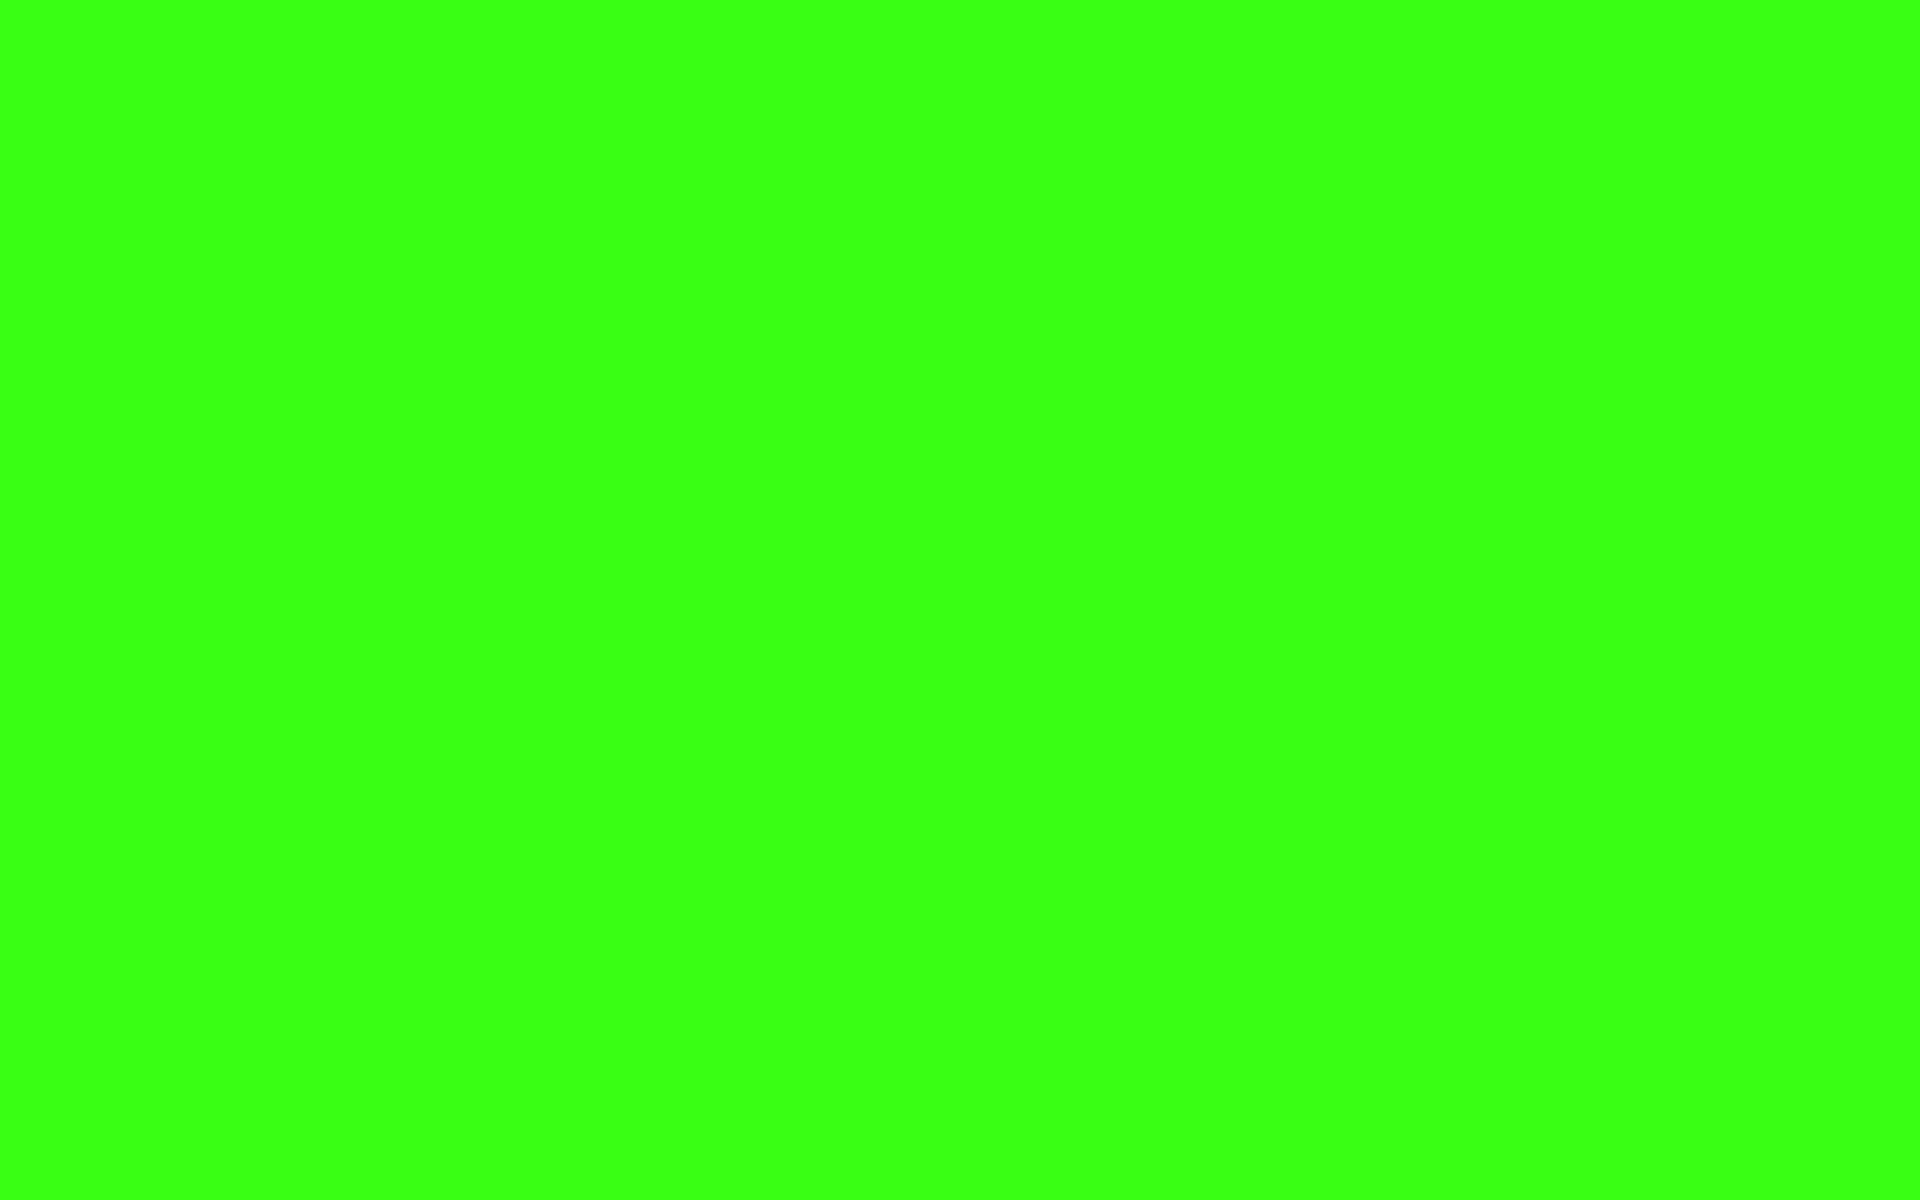 Neon Green Backgrounds Related Keywords amp Suggestions